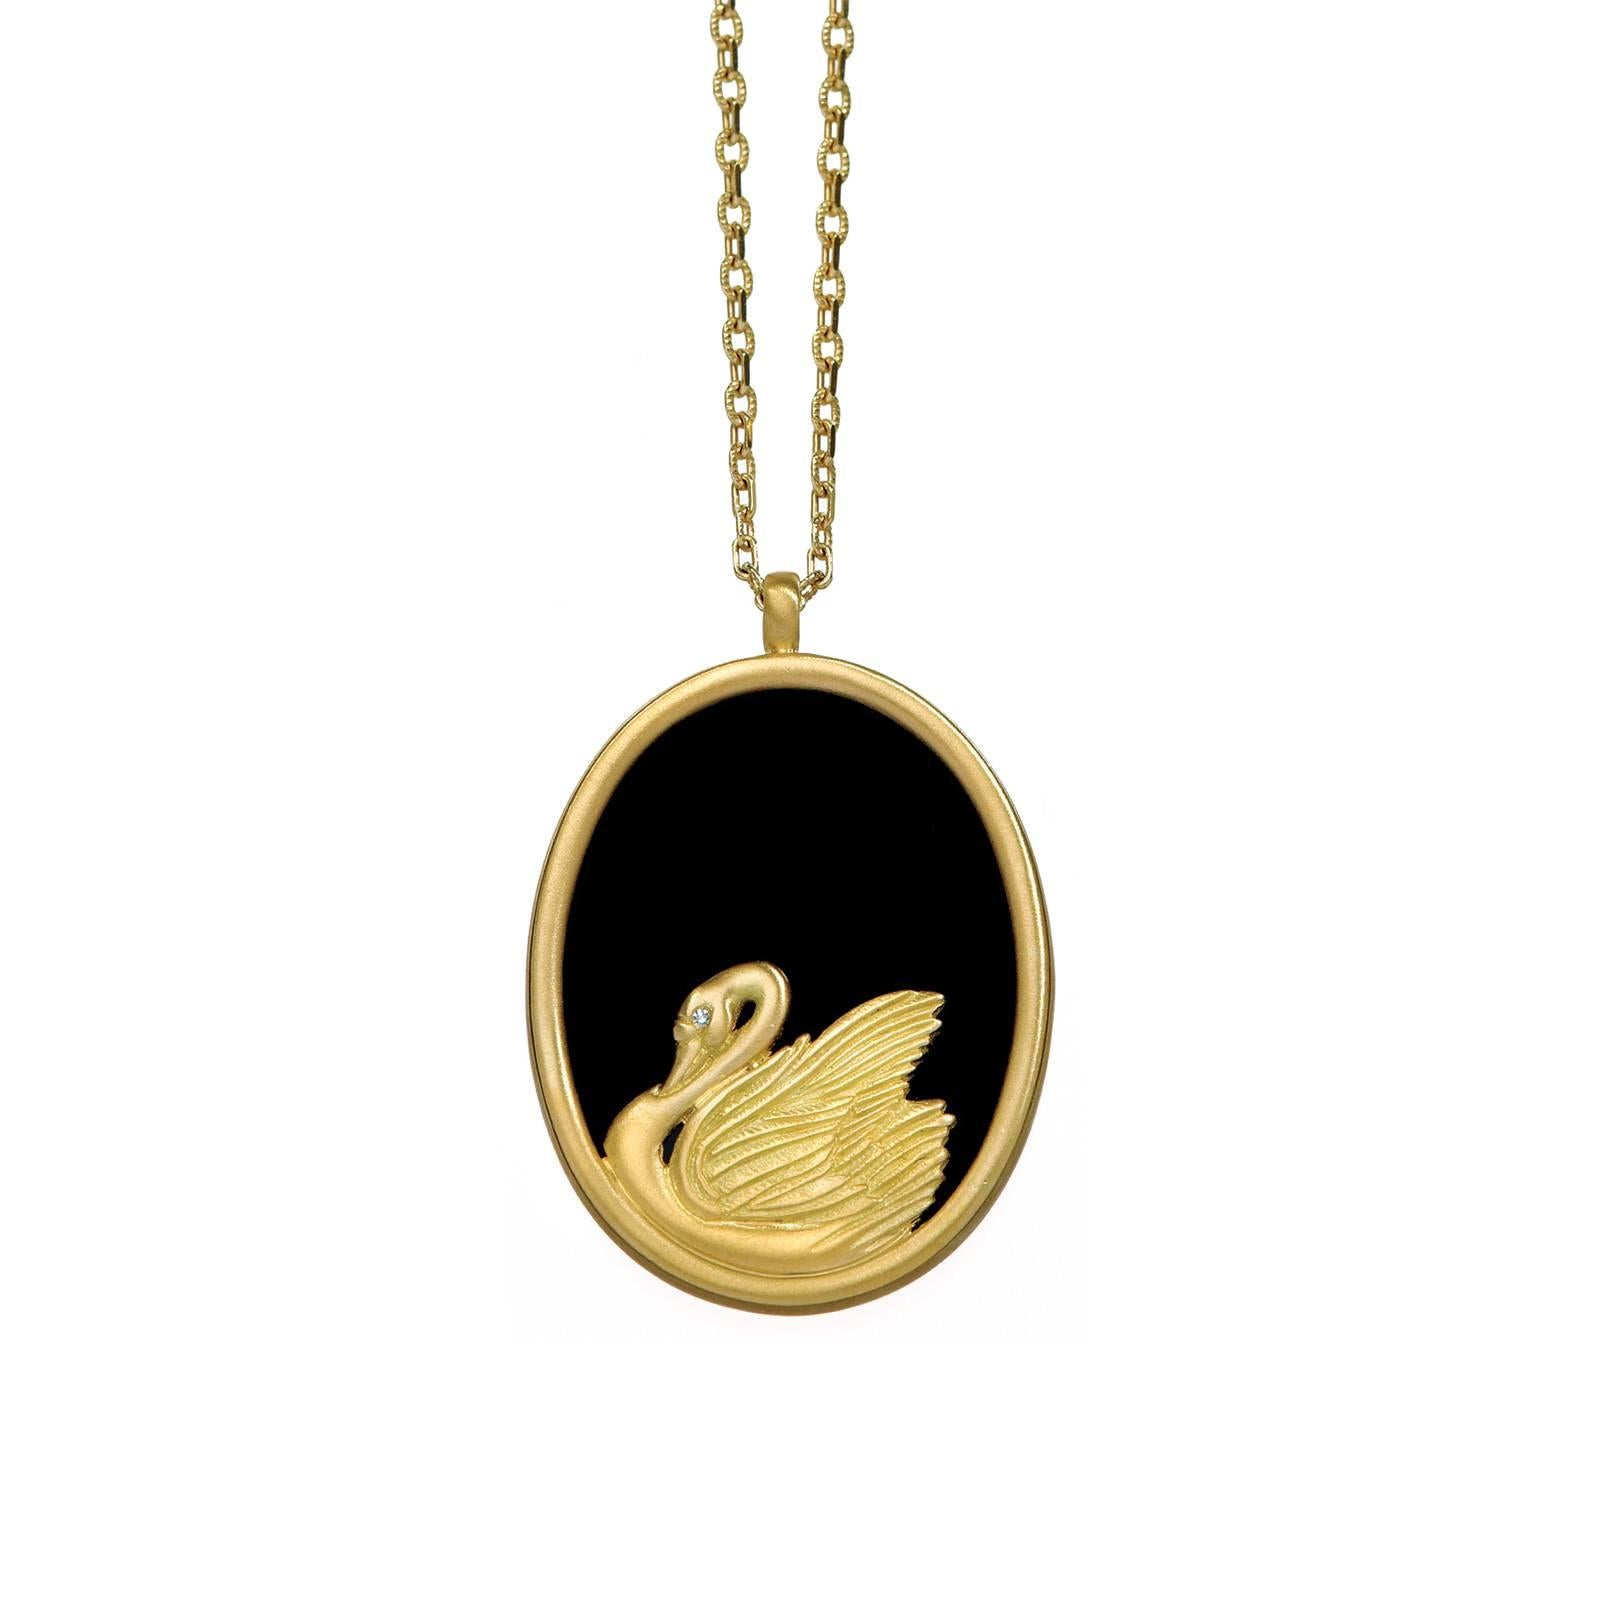 Wendy Brandes Onyx and 18K Yellow Gold Swan Pendant Necklace With Diamond Accent